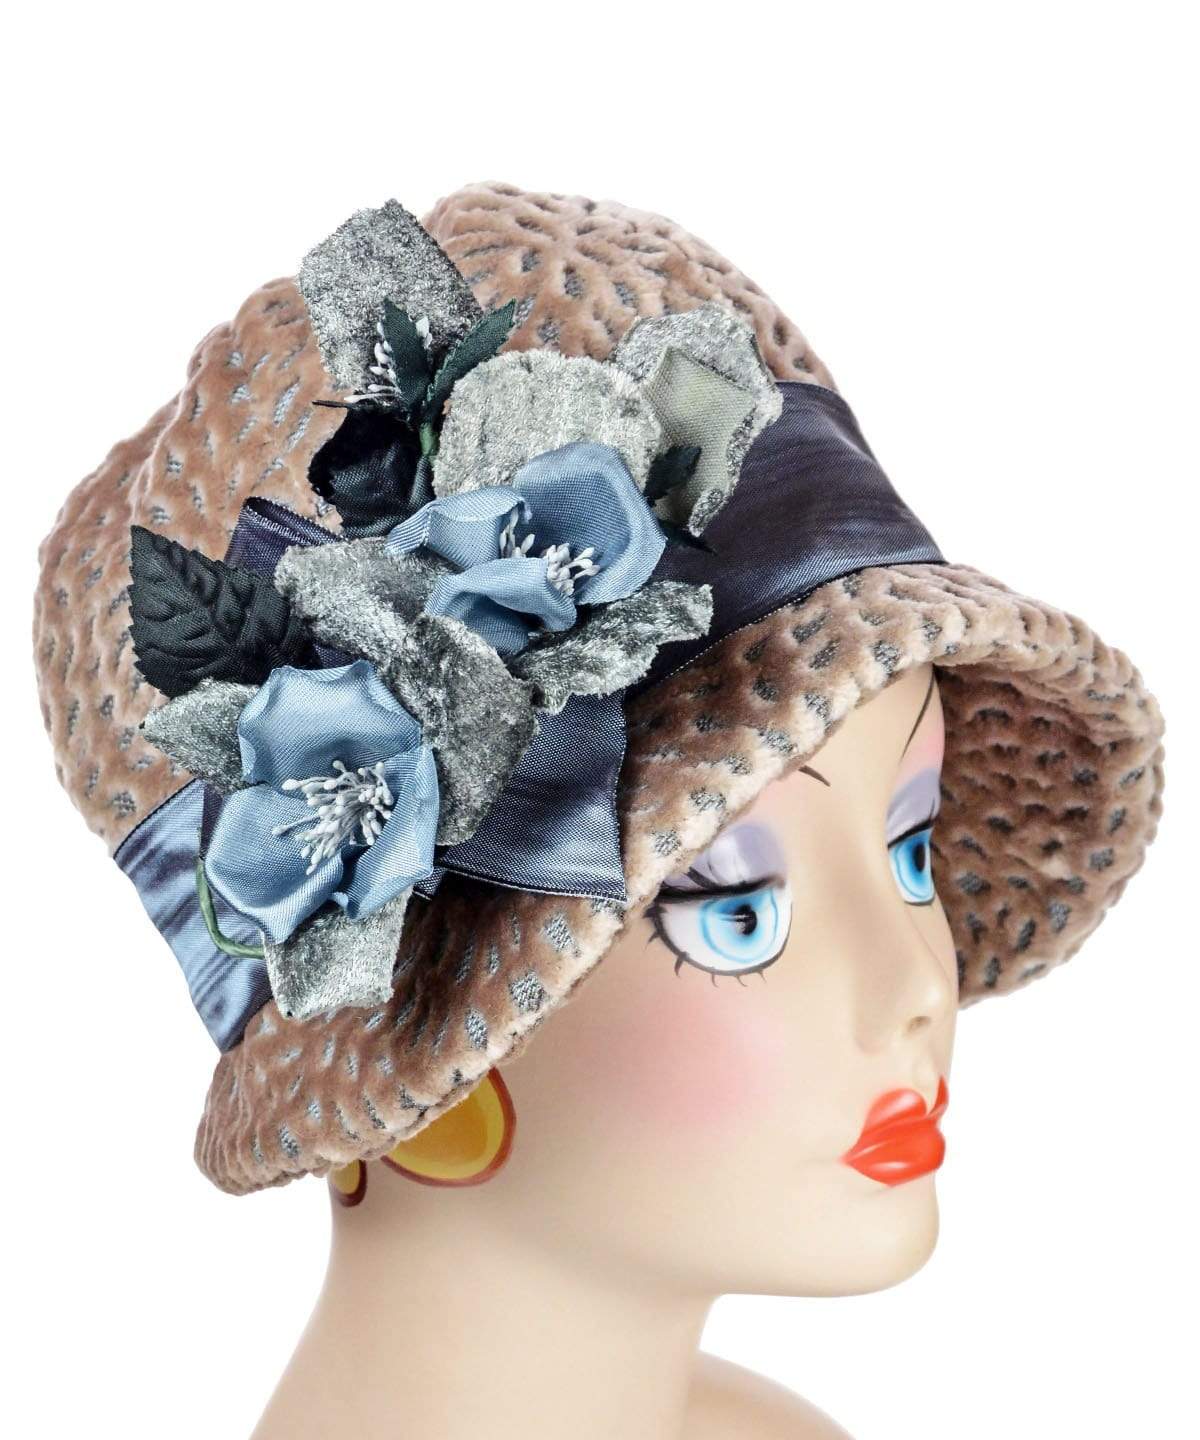 Grace Cloche Hat in Rossini Upholstery Fabric with Band in Blue Moiré Taffeta Featuring Big Custom Blue Flowers | By Pandemonium Millinery | Handmade in Seattle WA USA